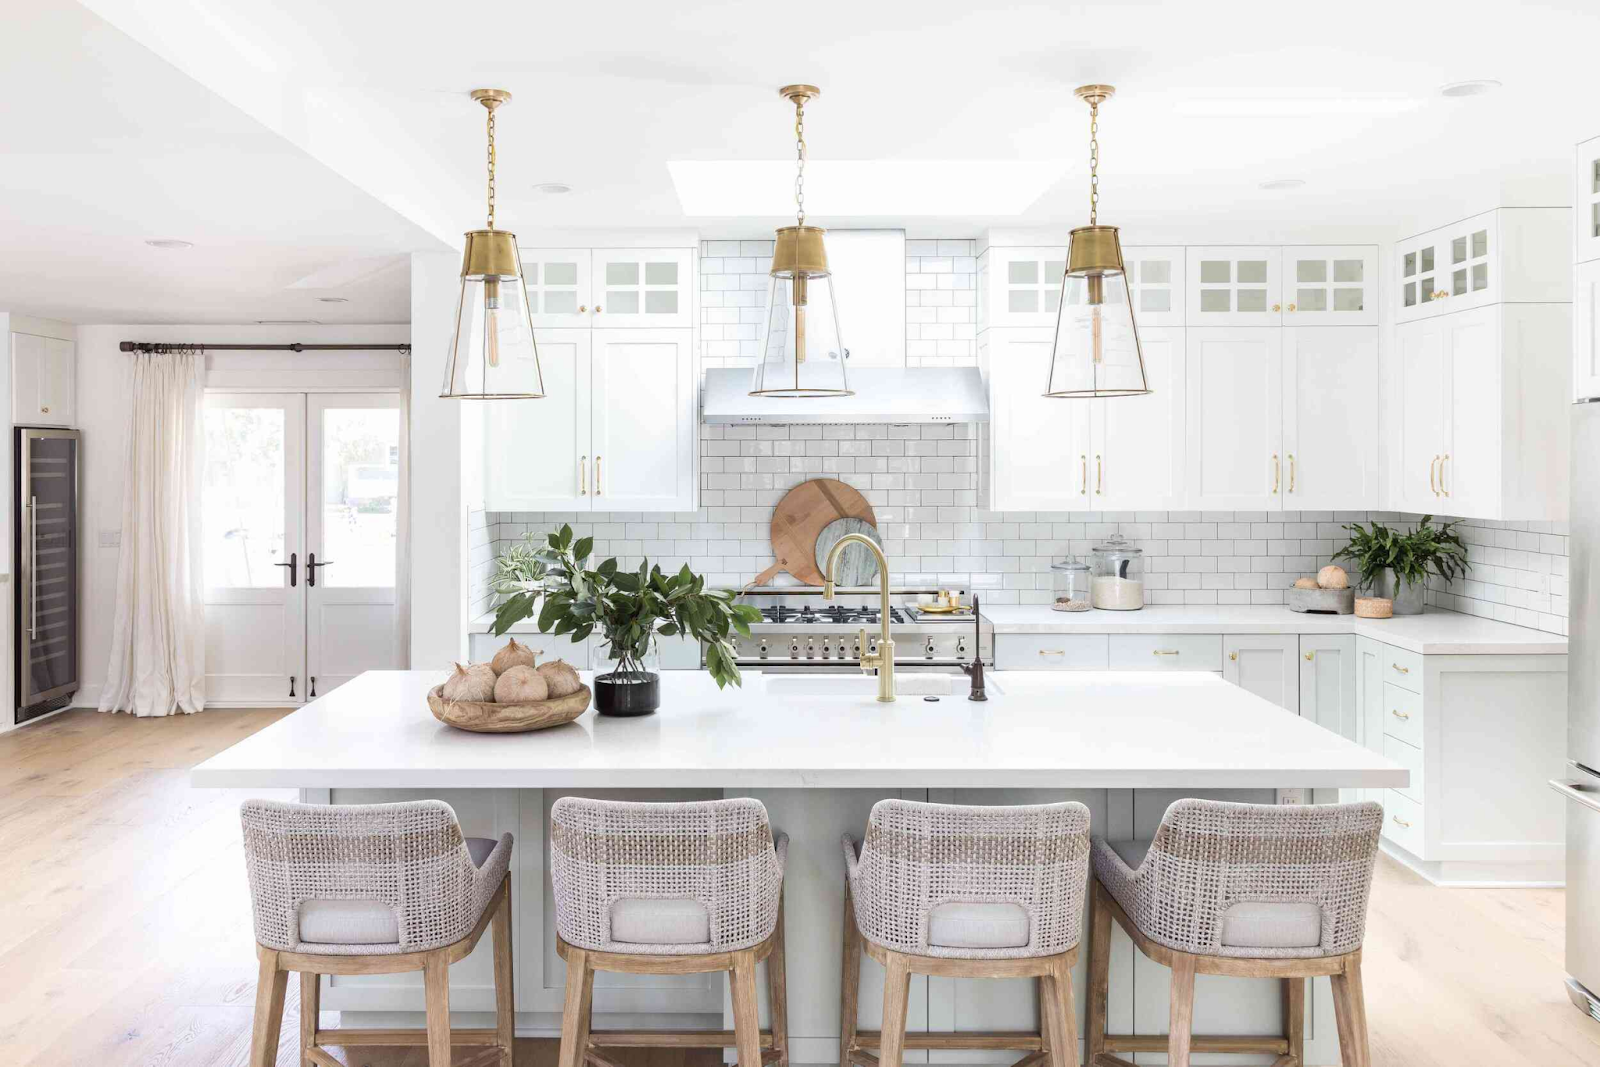 How to Clean Your Light Fixtures: The Ultimate Guide to Cleaning Light Fixtures to Brighten Up Your Space